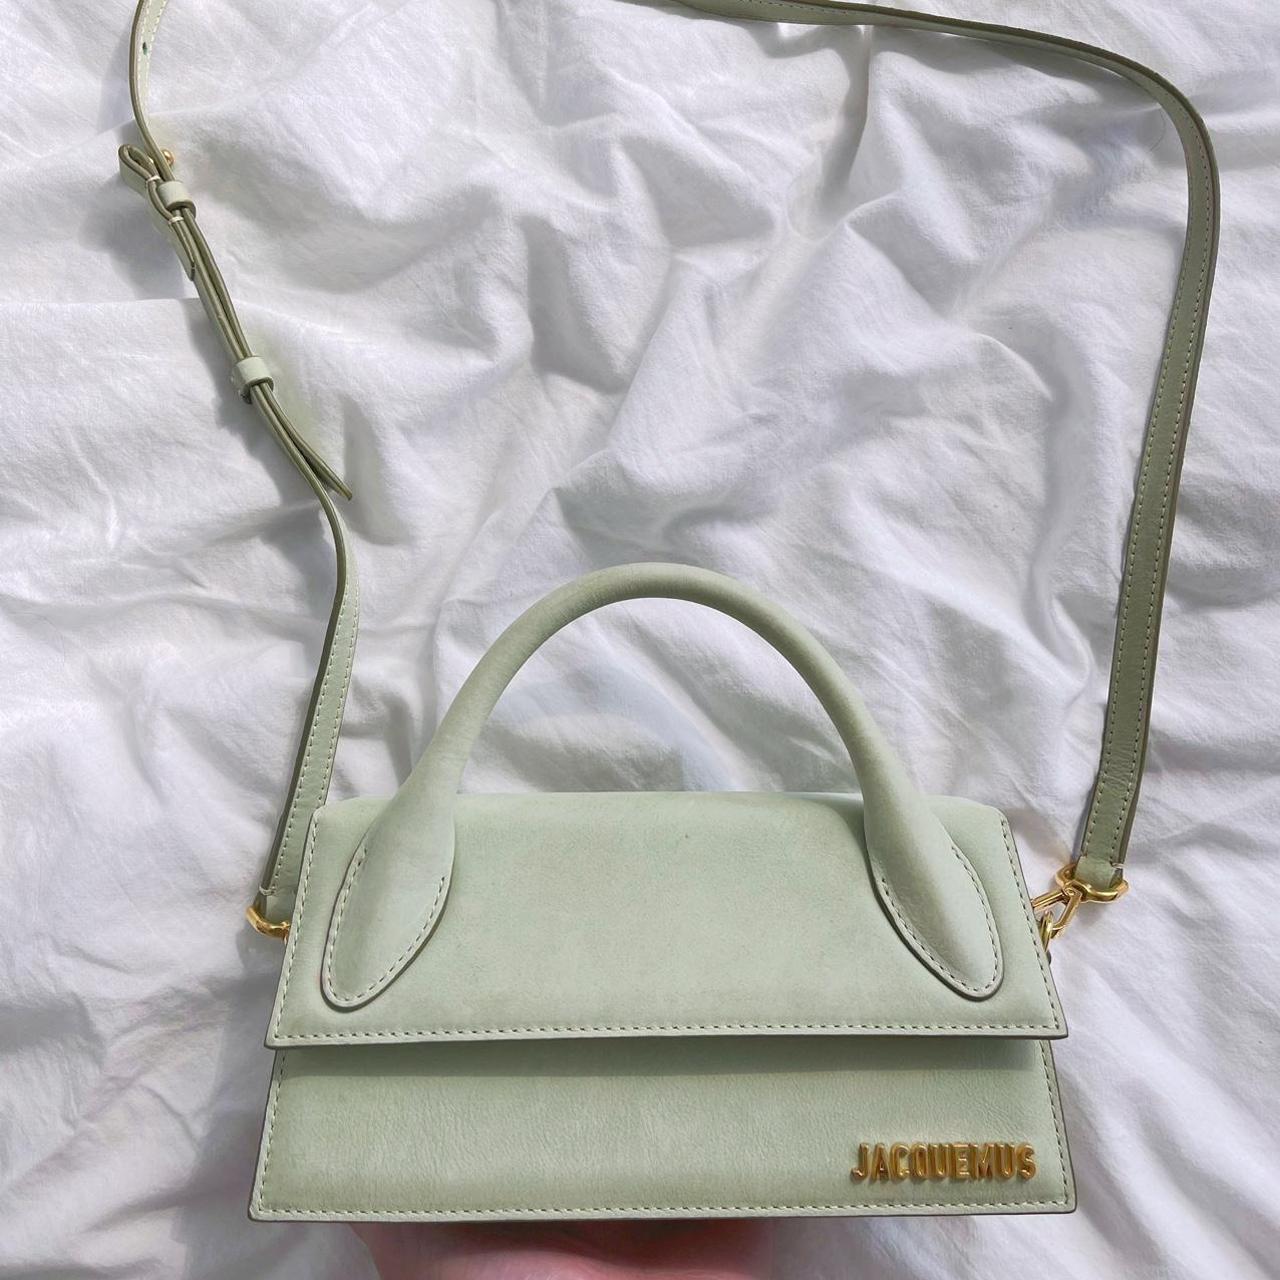 Jacquemus Le Chiquito Long Suede Top Handle Bag in Gray